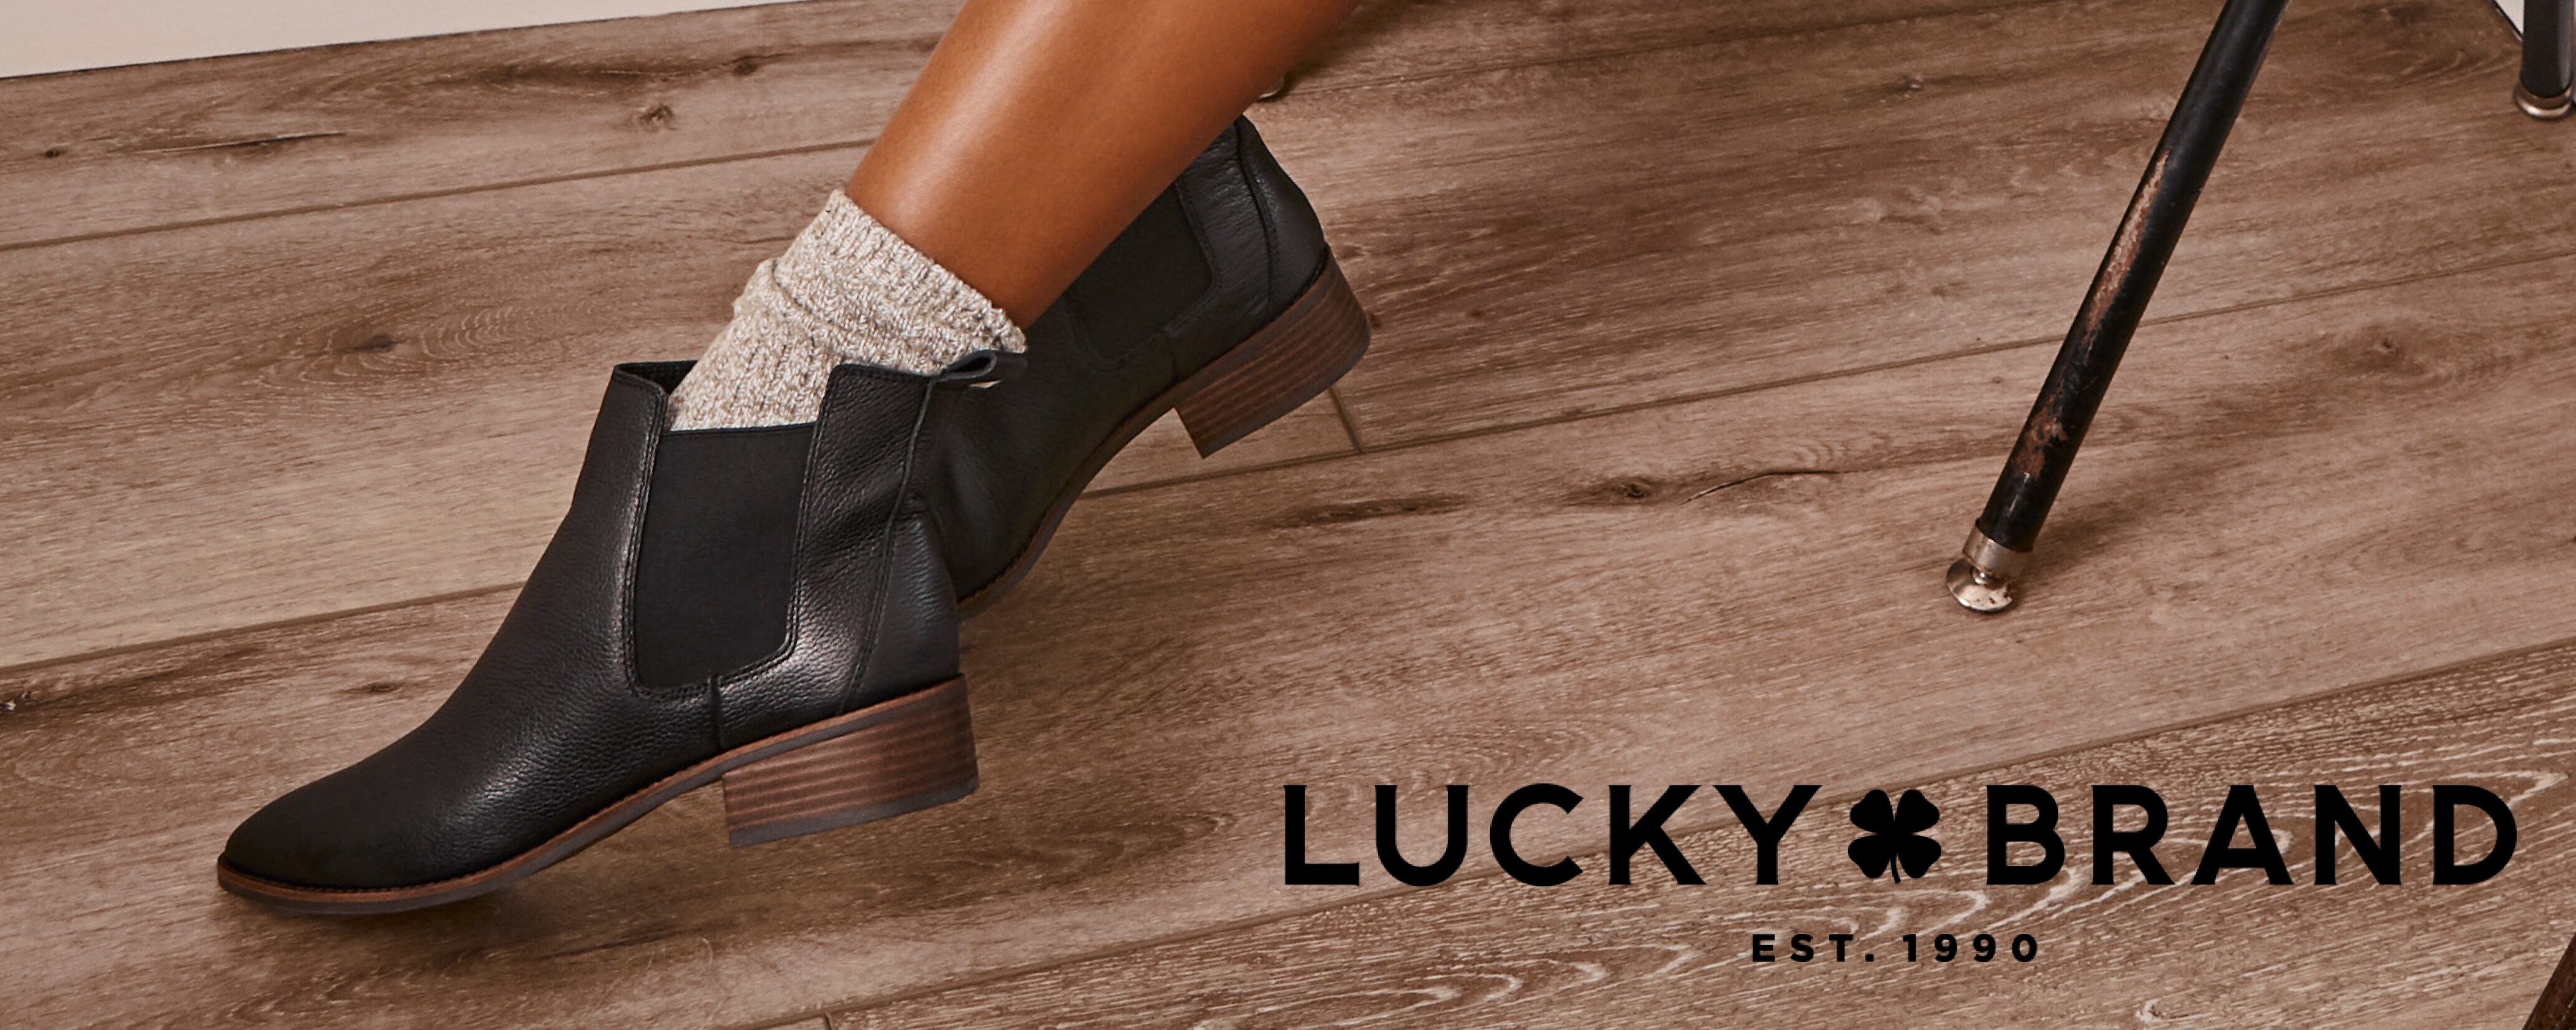 lucky brand girls shoes